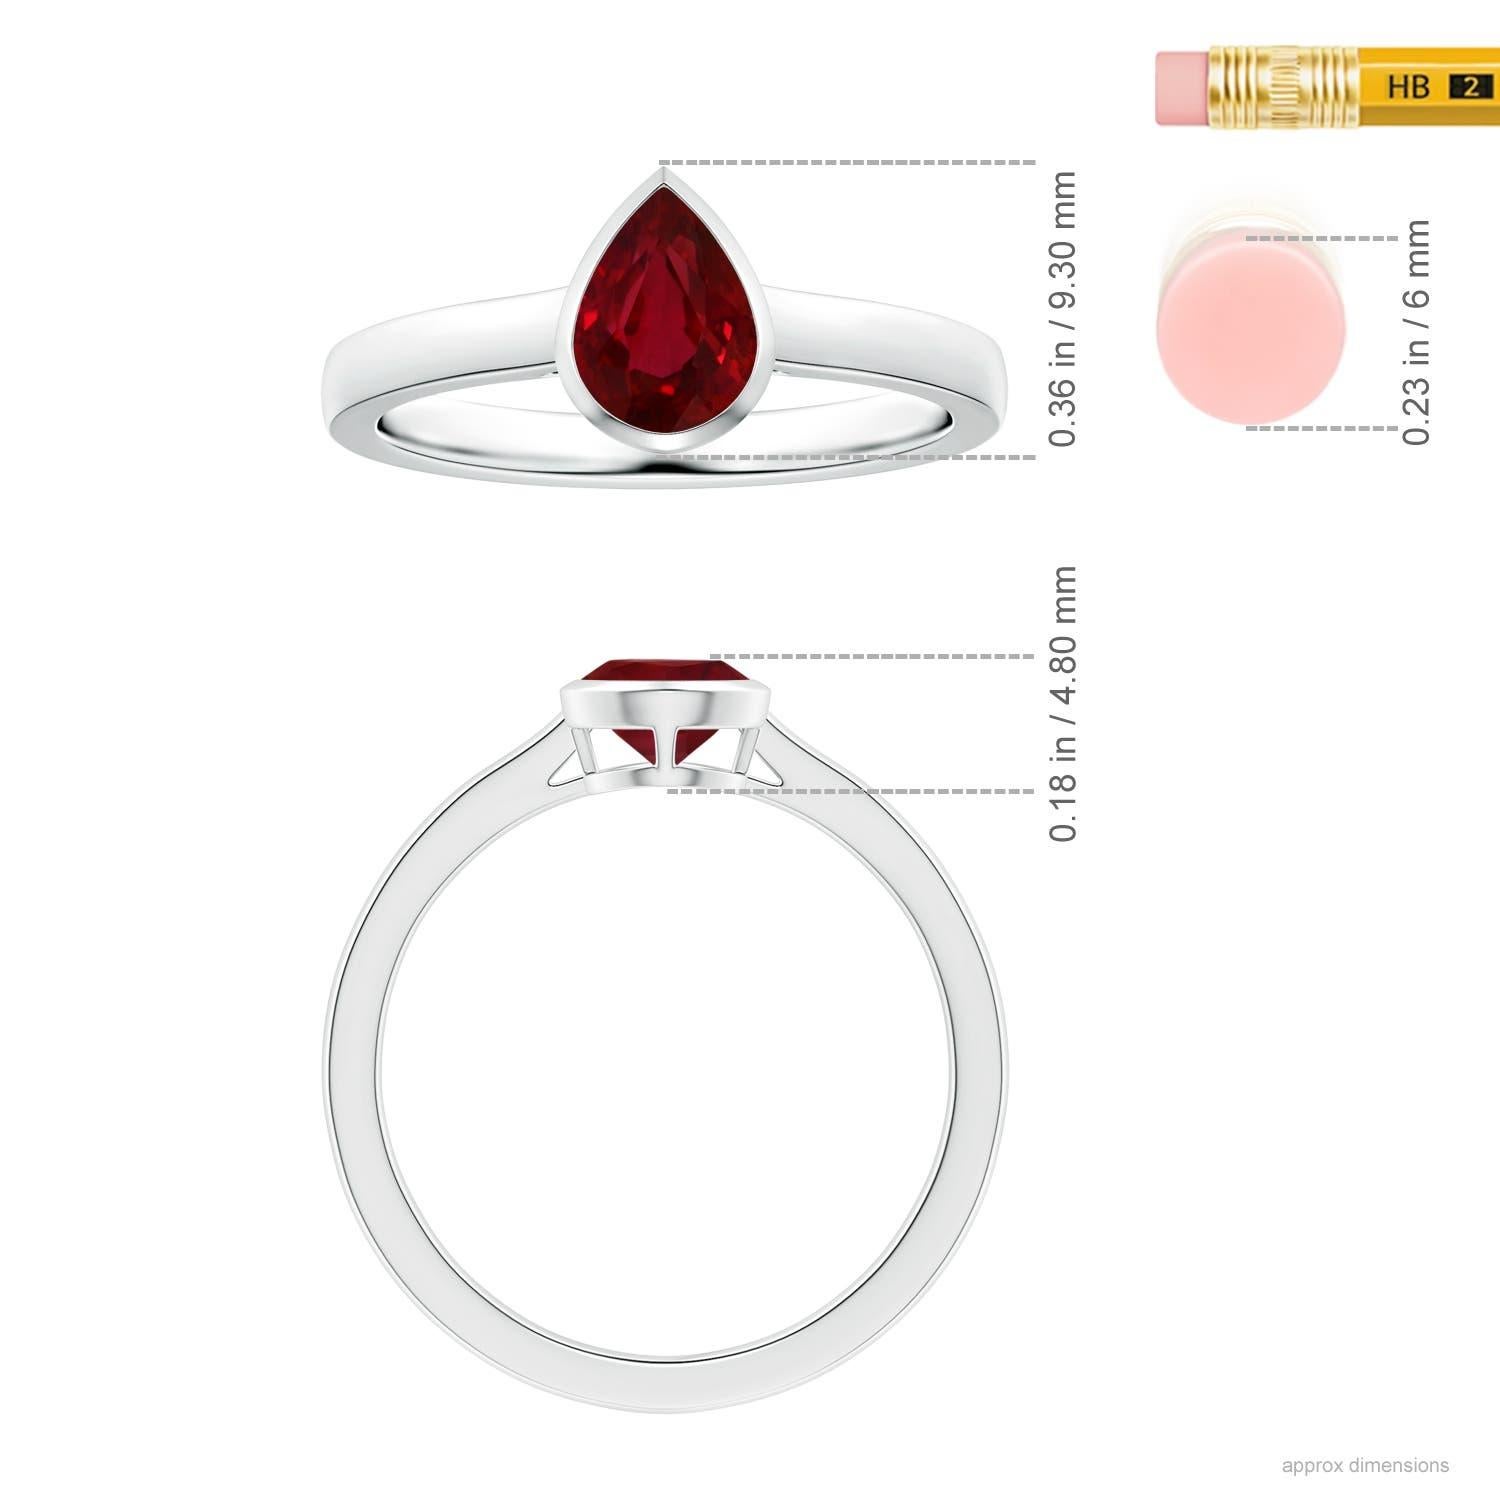 For Sale:  ANGARA Bezel-Set GIA Certified Pear-Shaped Ruby Solitaire Ring in Platinum 5